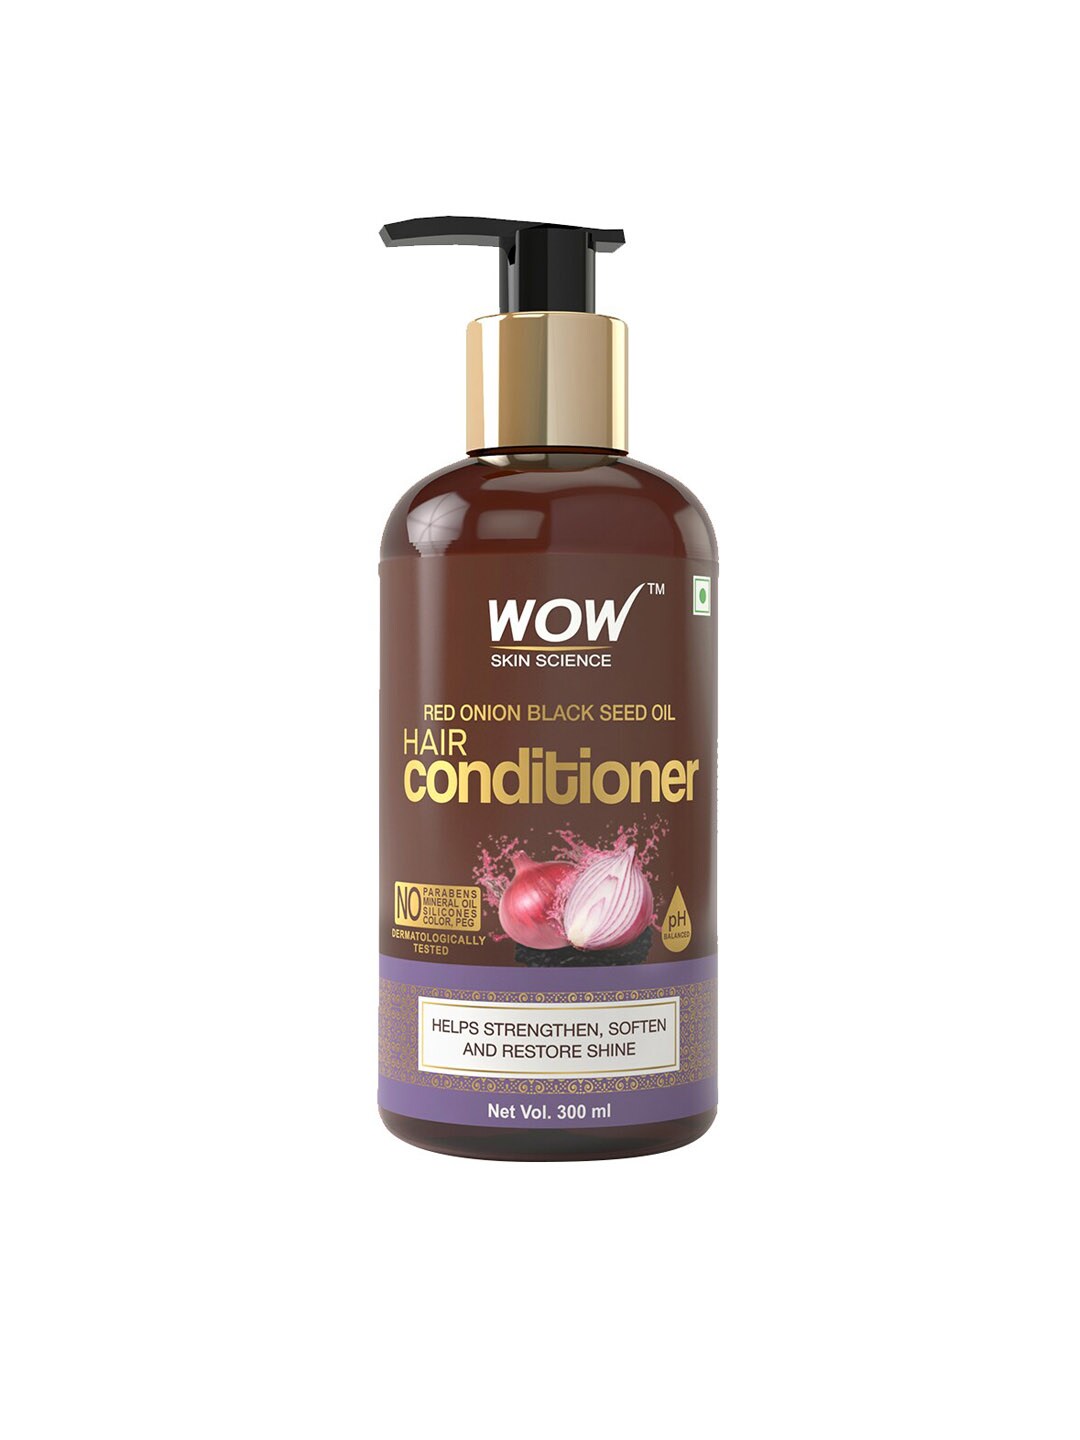 WOW SKIN SCIENCE Onion Black Seed Oil Hair Conditioner 300 ml Price in India